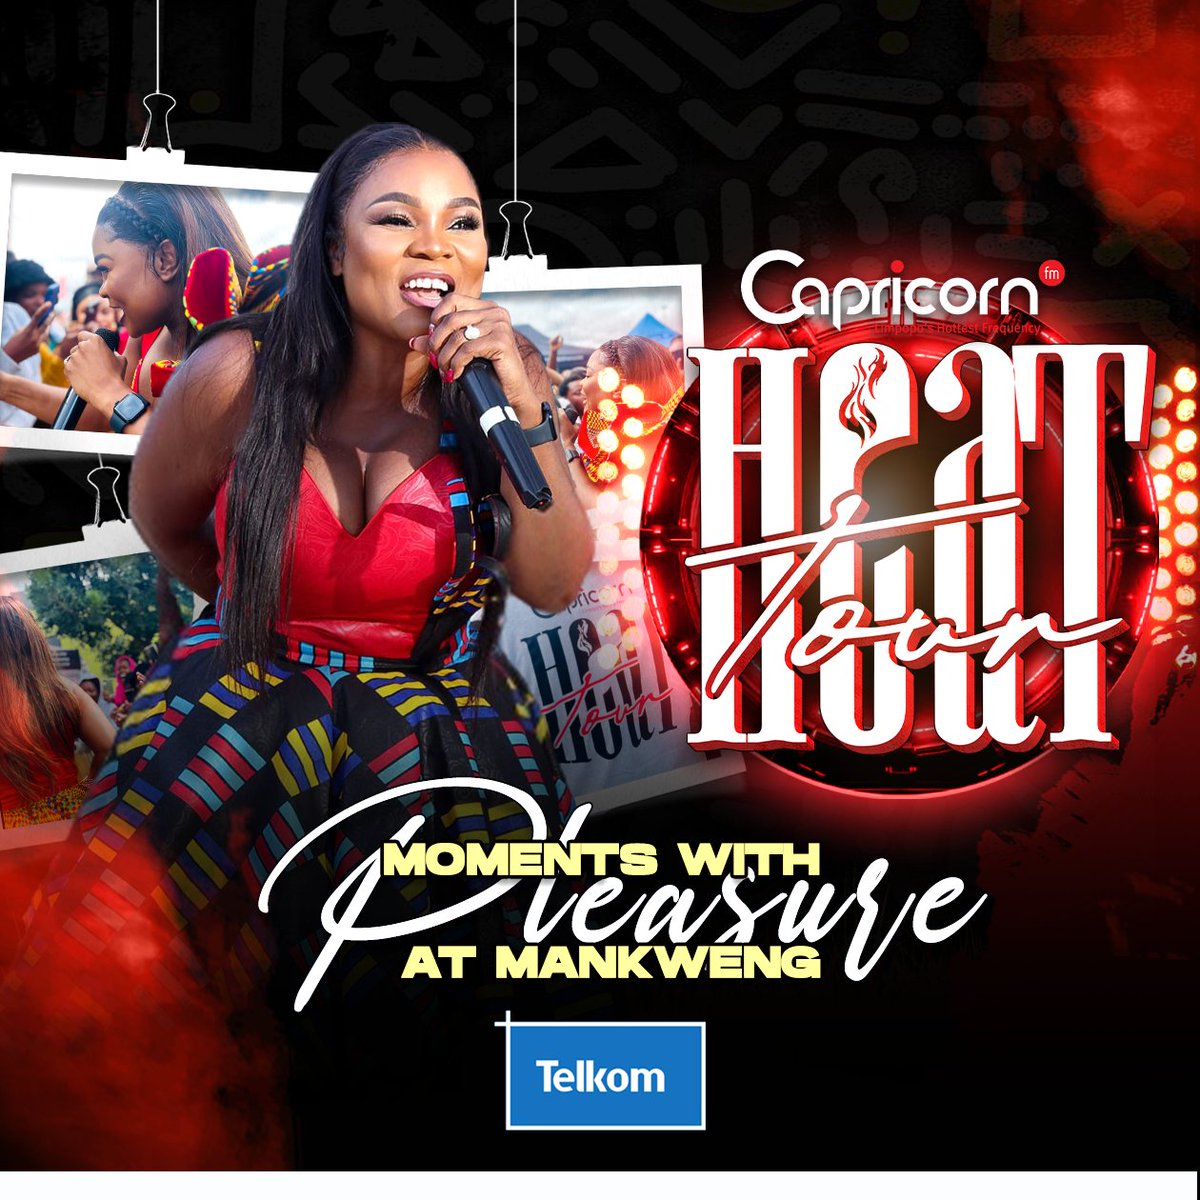 Looking back at last Saturday's sizzling performance by @PleasurePeta at Paledi Mall for the #CapricornFMHeatTour!💃 From the hits to unforgettable melodies, she had everyone on their feet, dancing & singing along! 🎶 🔥 | The #CapricornFMHeatTour in association with @TelkomZA.